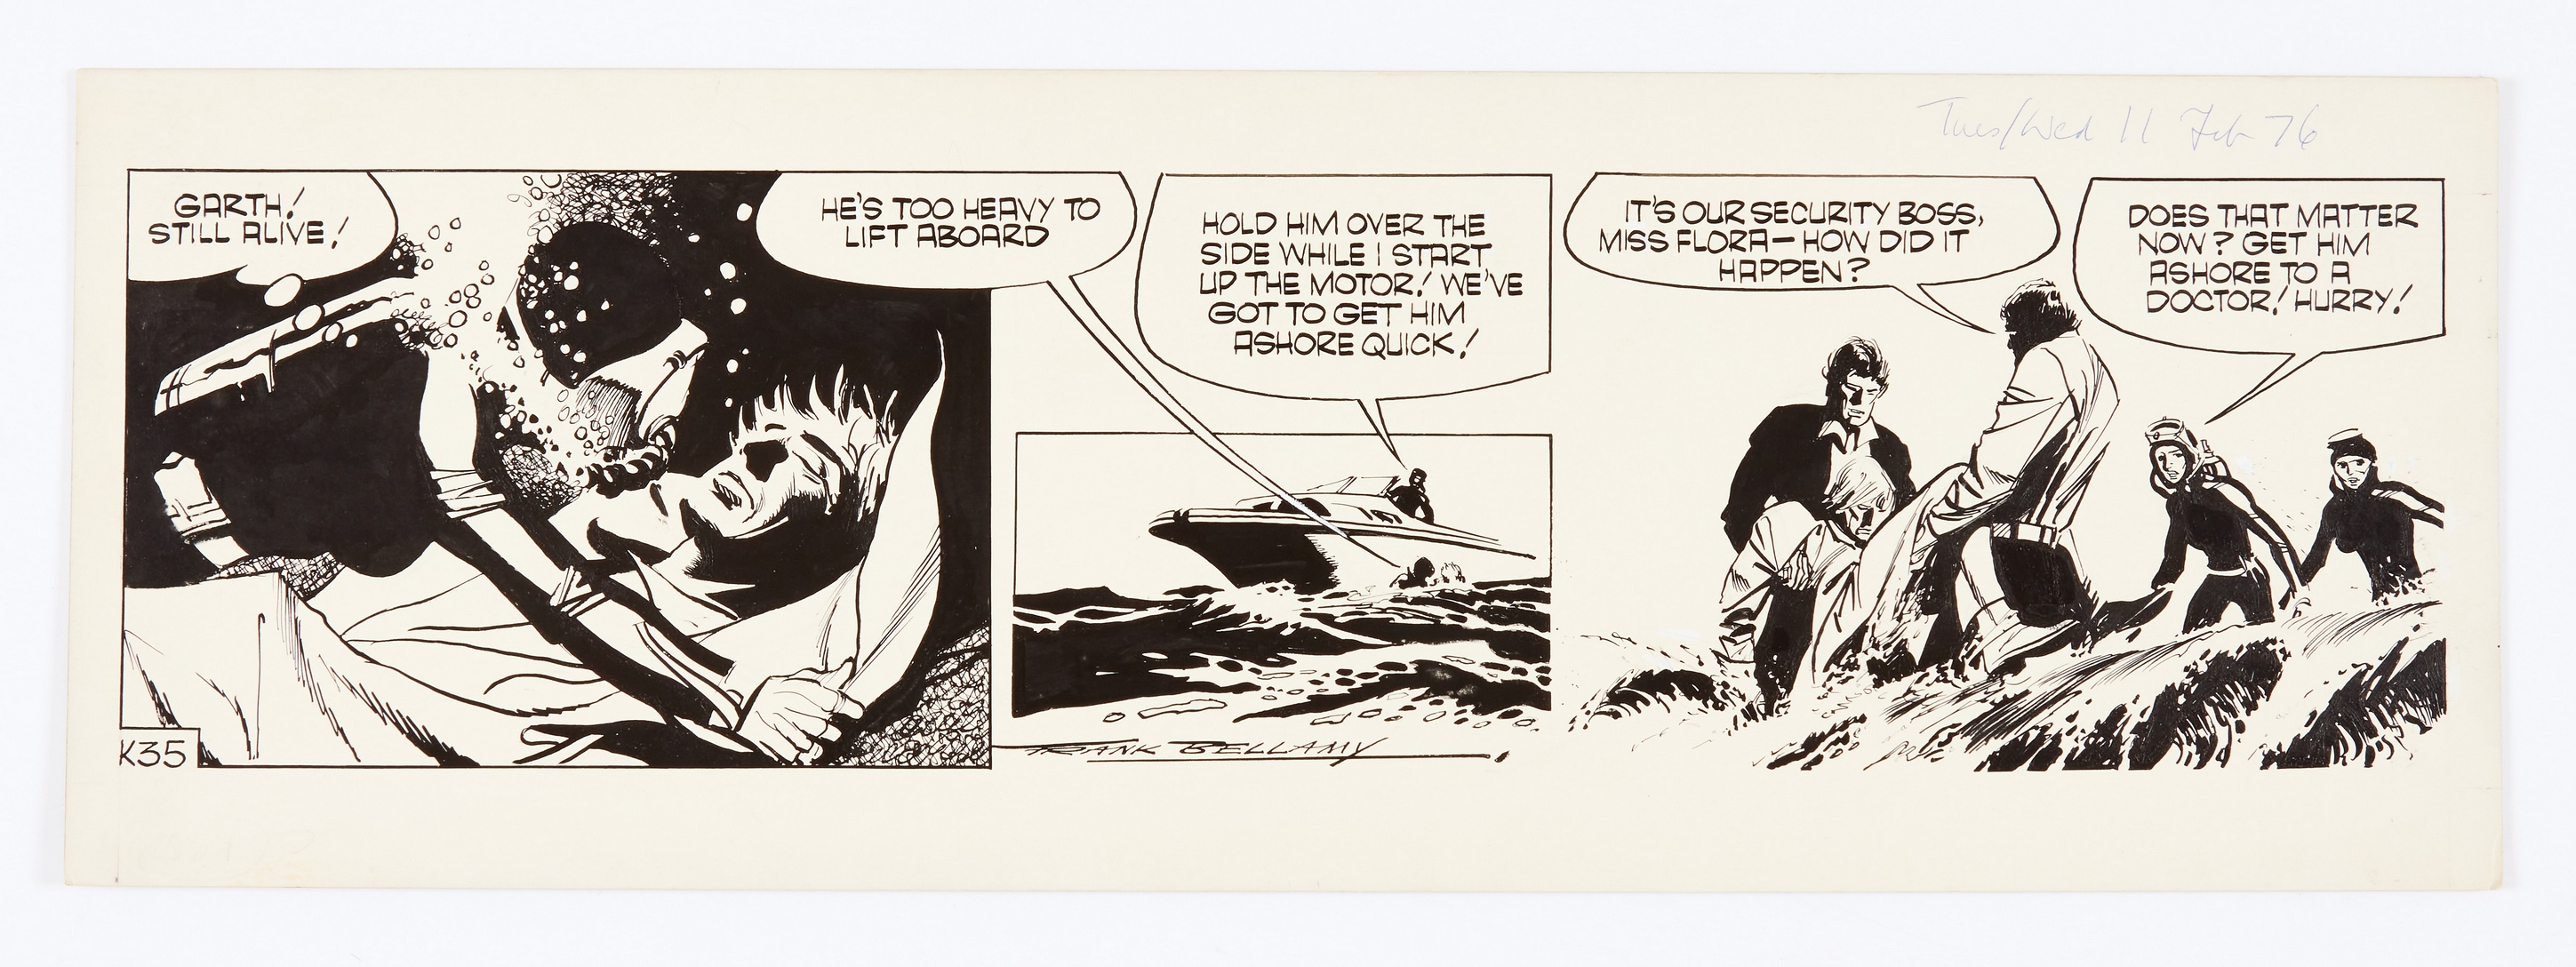 Garth: 'The Beautiful People' signed original artwork (1976) by Frank Bellamy for the D. Mirror 11